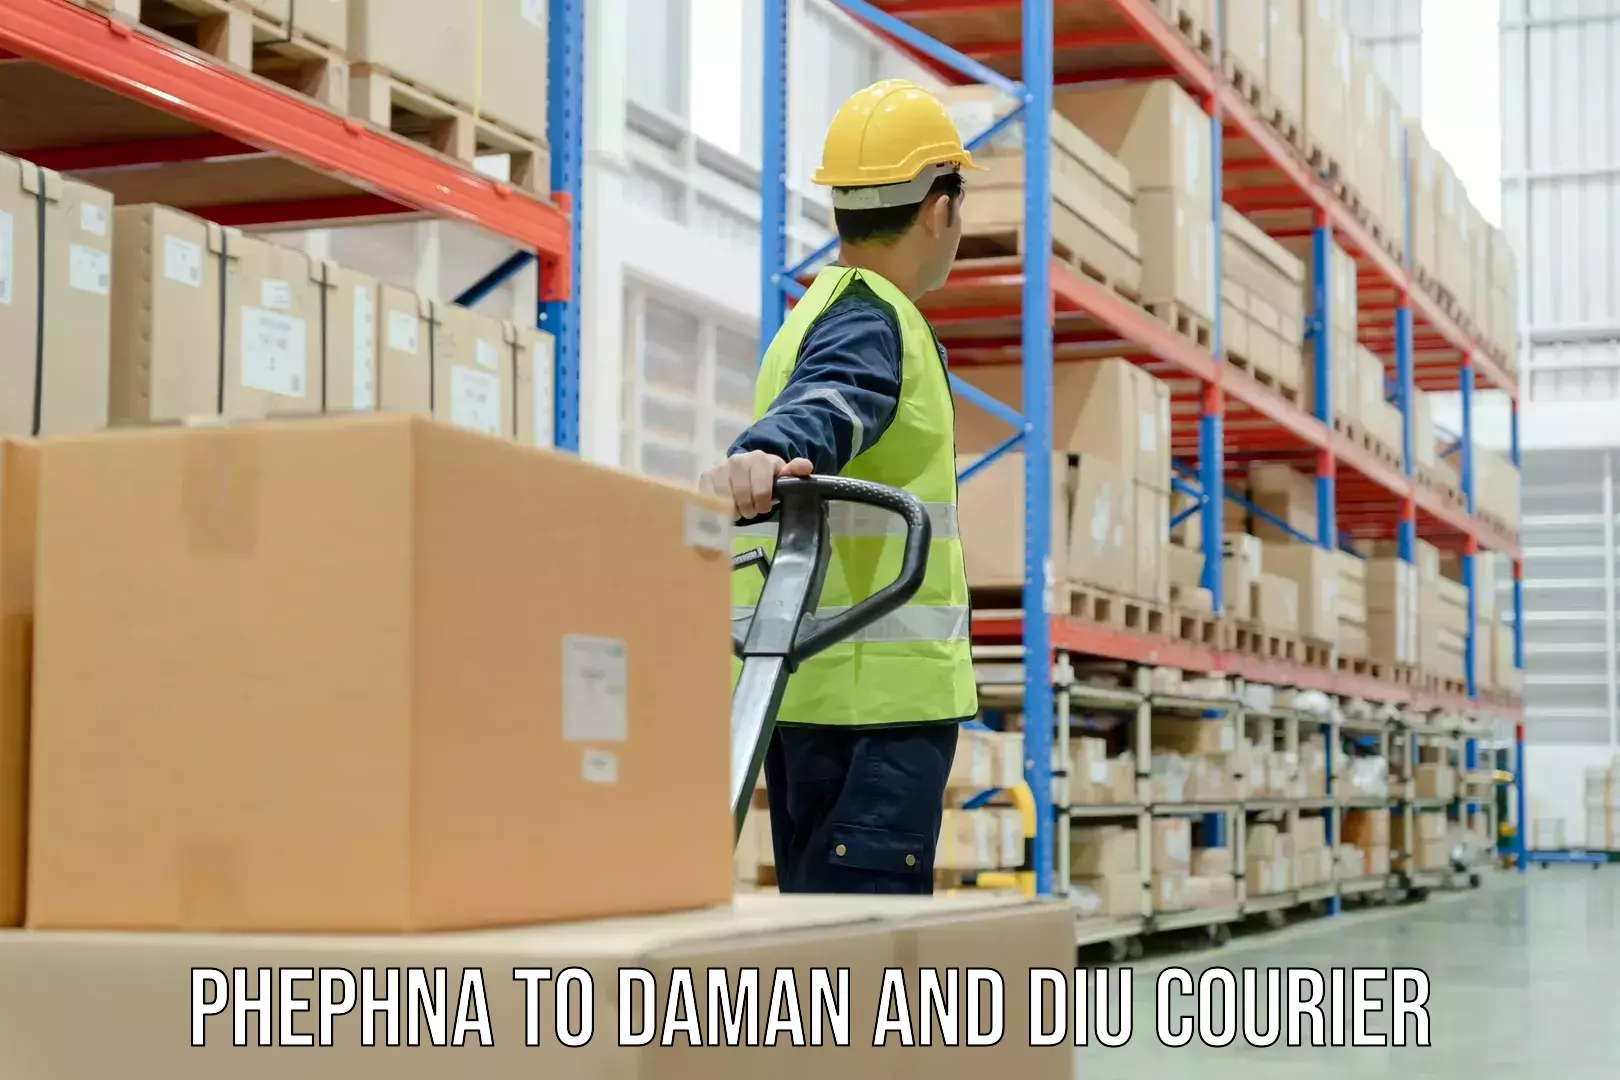 Reliable parcel services Phephna to Daman and Diu